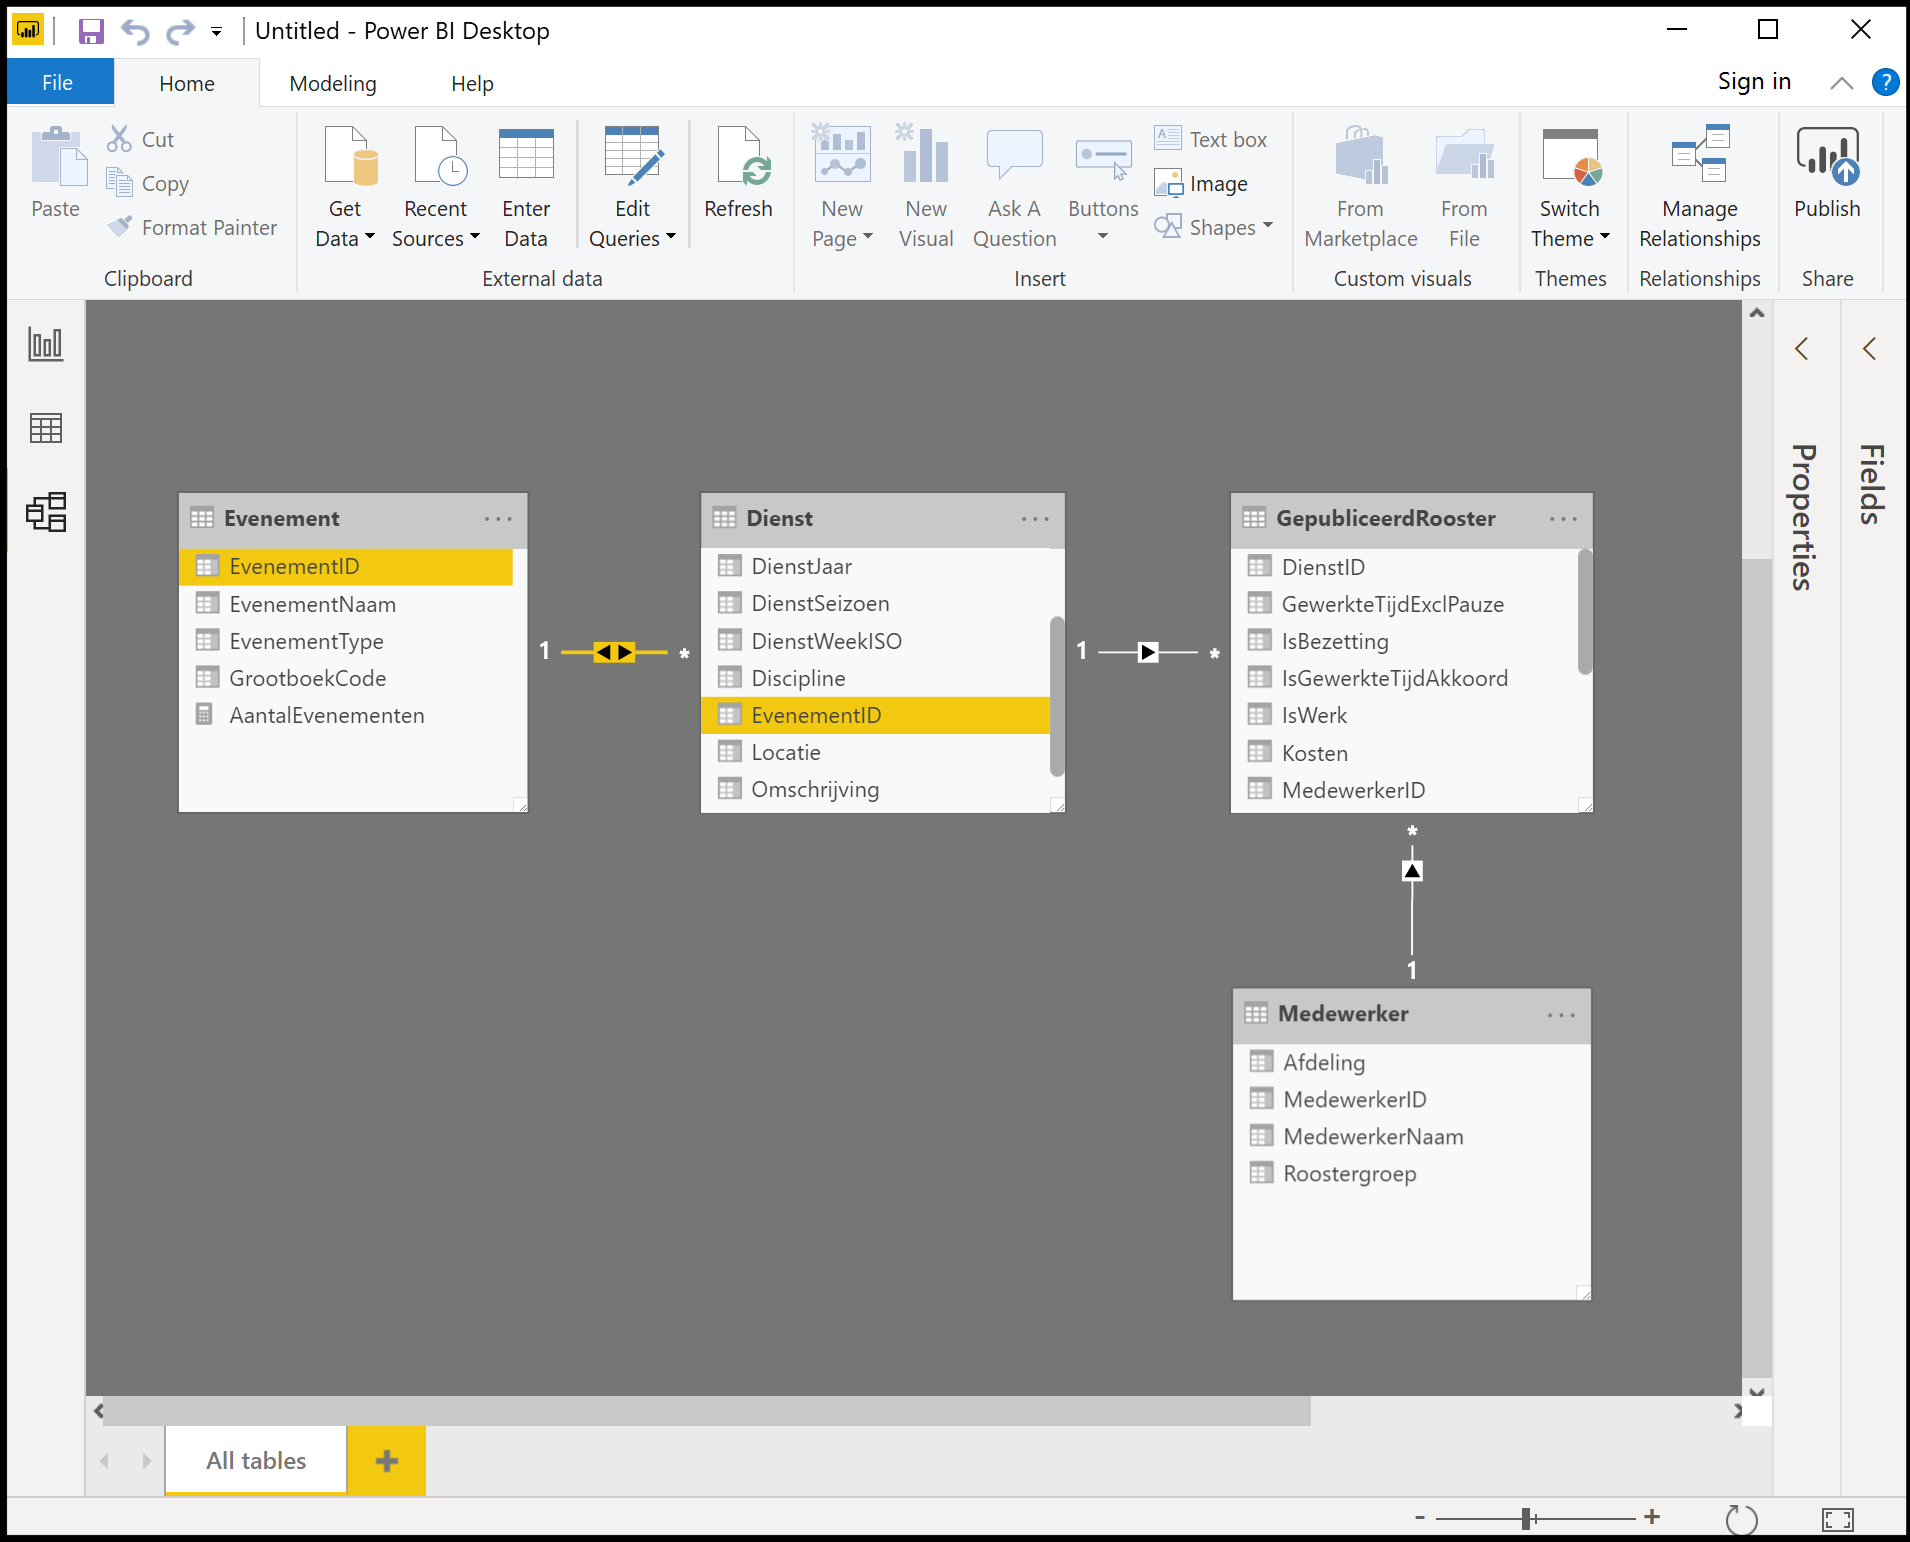 powerbi-crossfilter-direction-5-9804f6a1c3d9839dc564047cef5d6c21.png